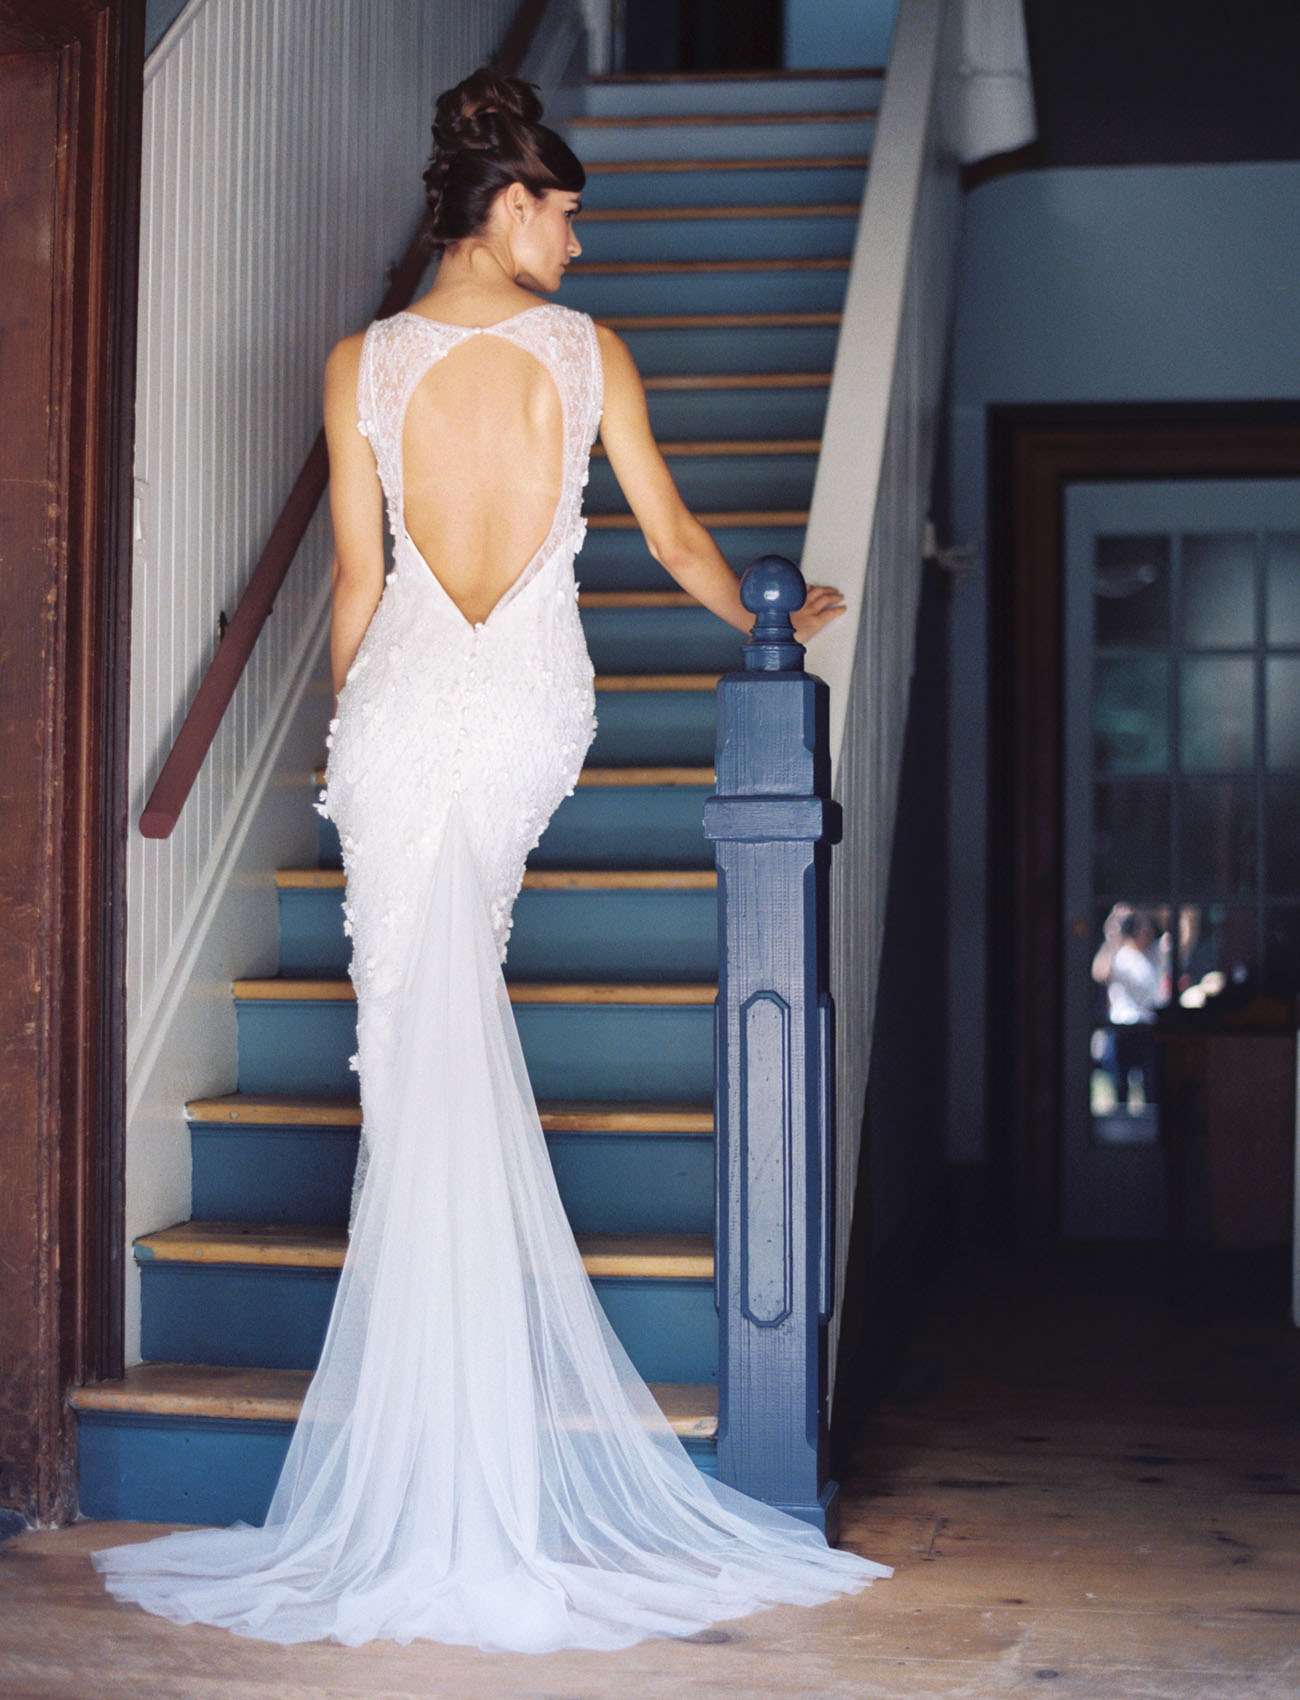 A back cutout and darling beaded detail, plus the flowing train make this gown stunning